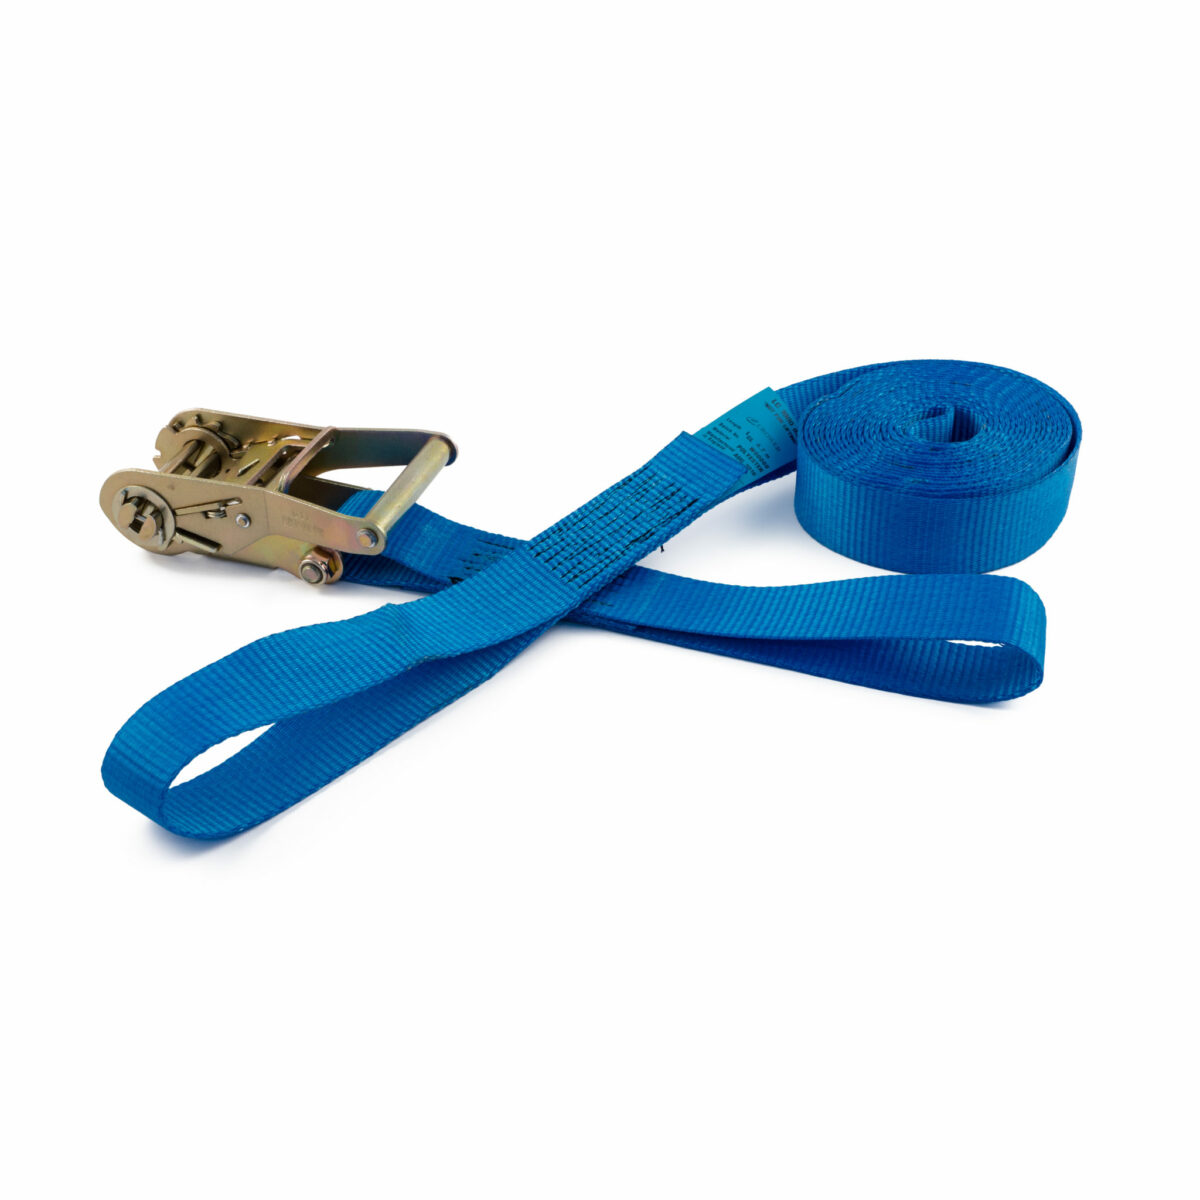 35mm Ratchet Straps with Loops rated to 2000Kg -GTF